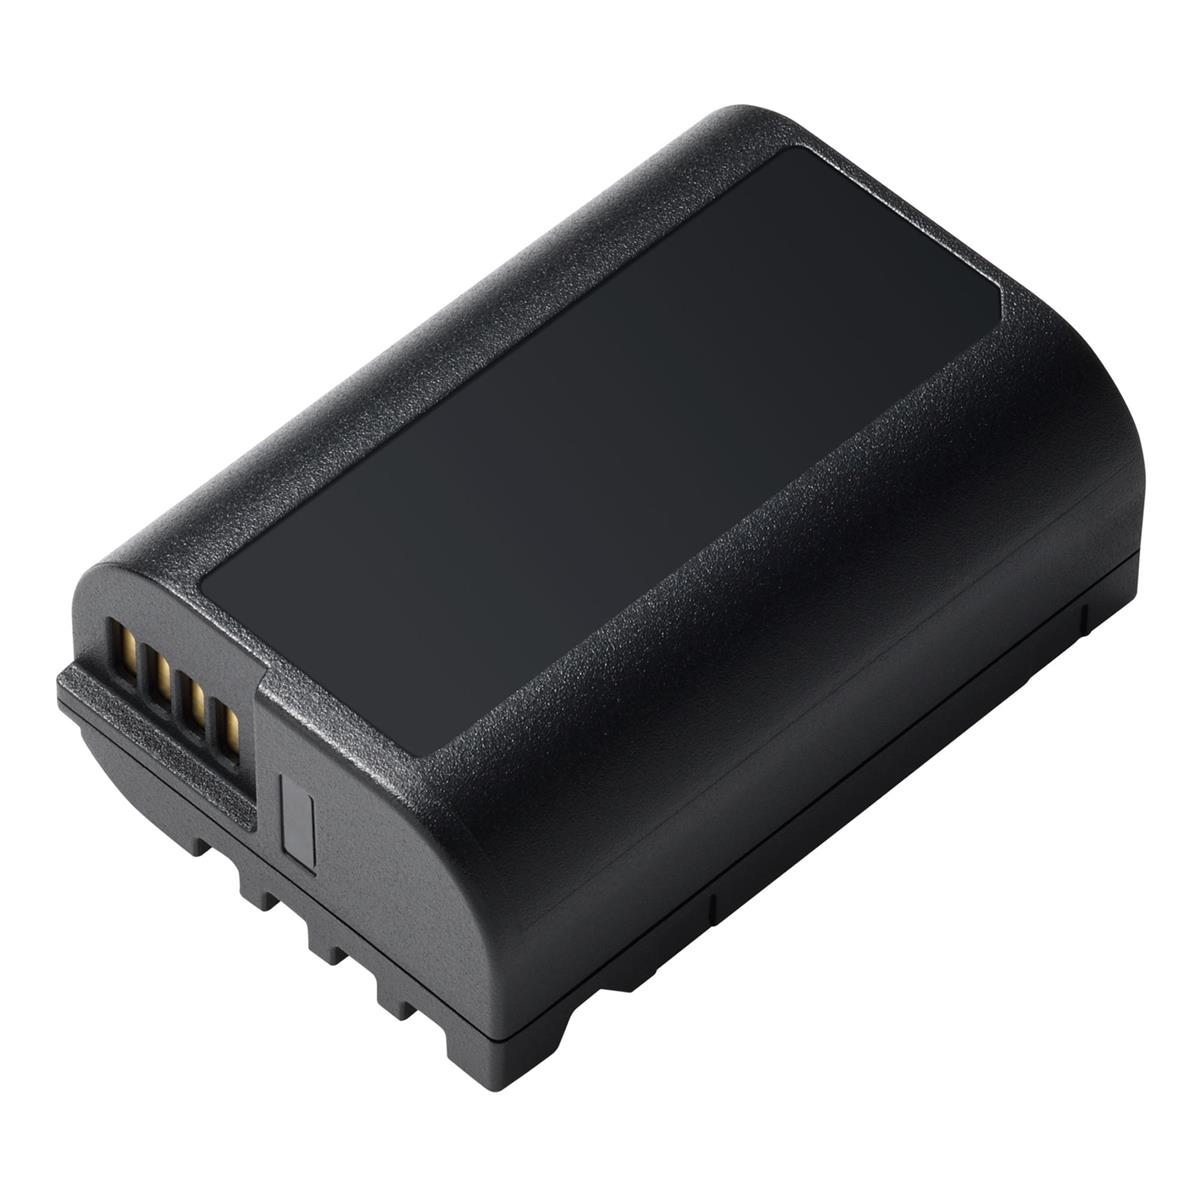 Image of Panasonic DMW-BLK22 Lithium-Ion Battery